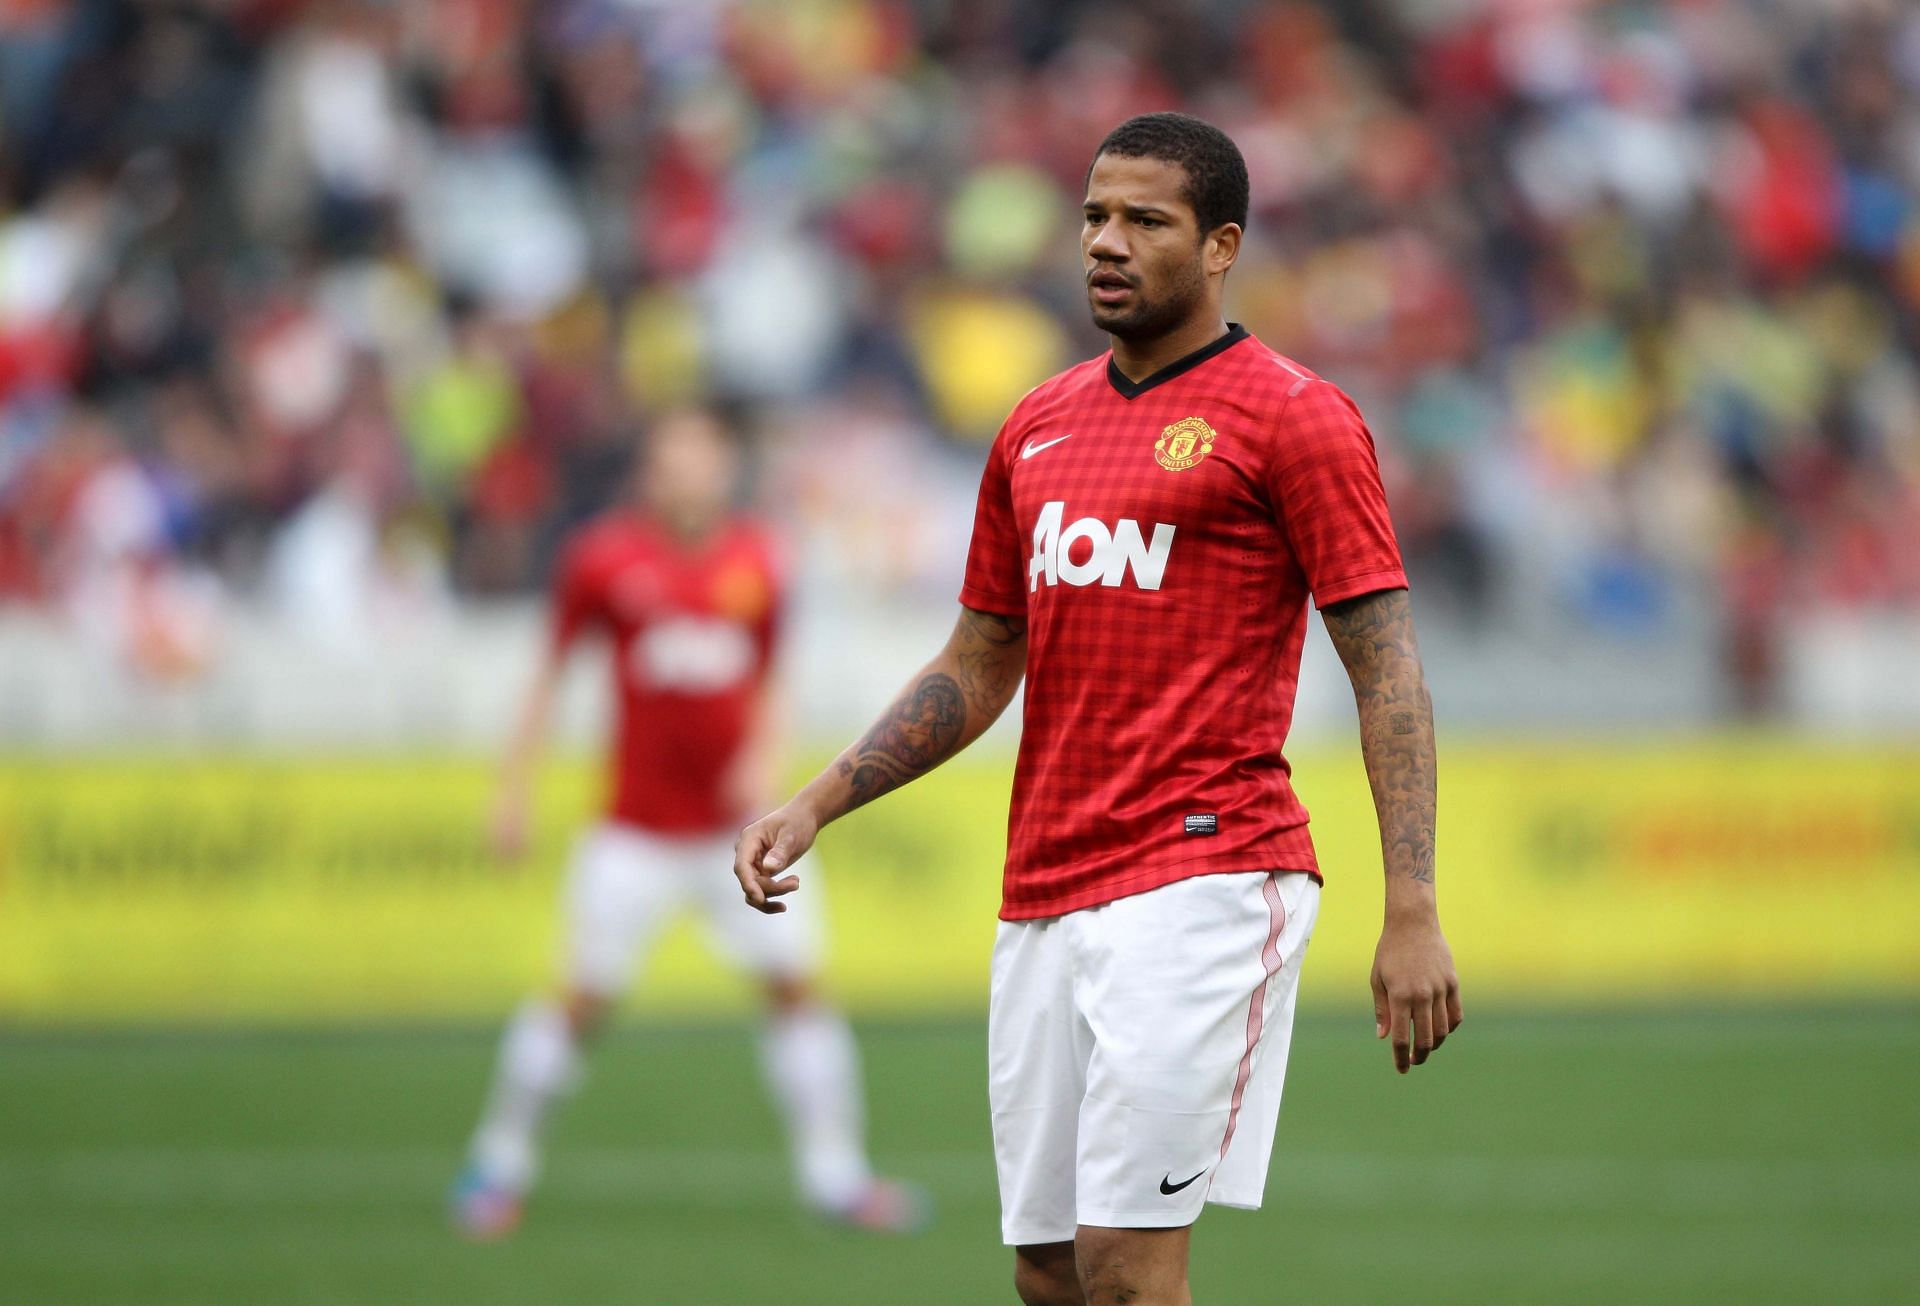 Bebe is currently plying his trade at Rayo Vallecano.